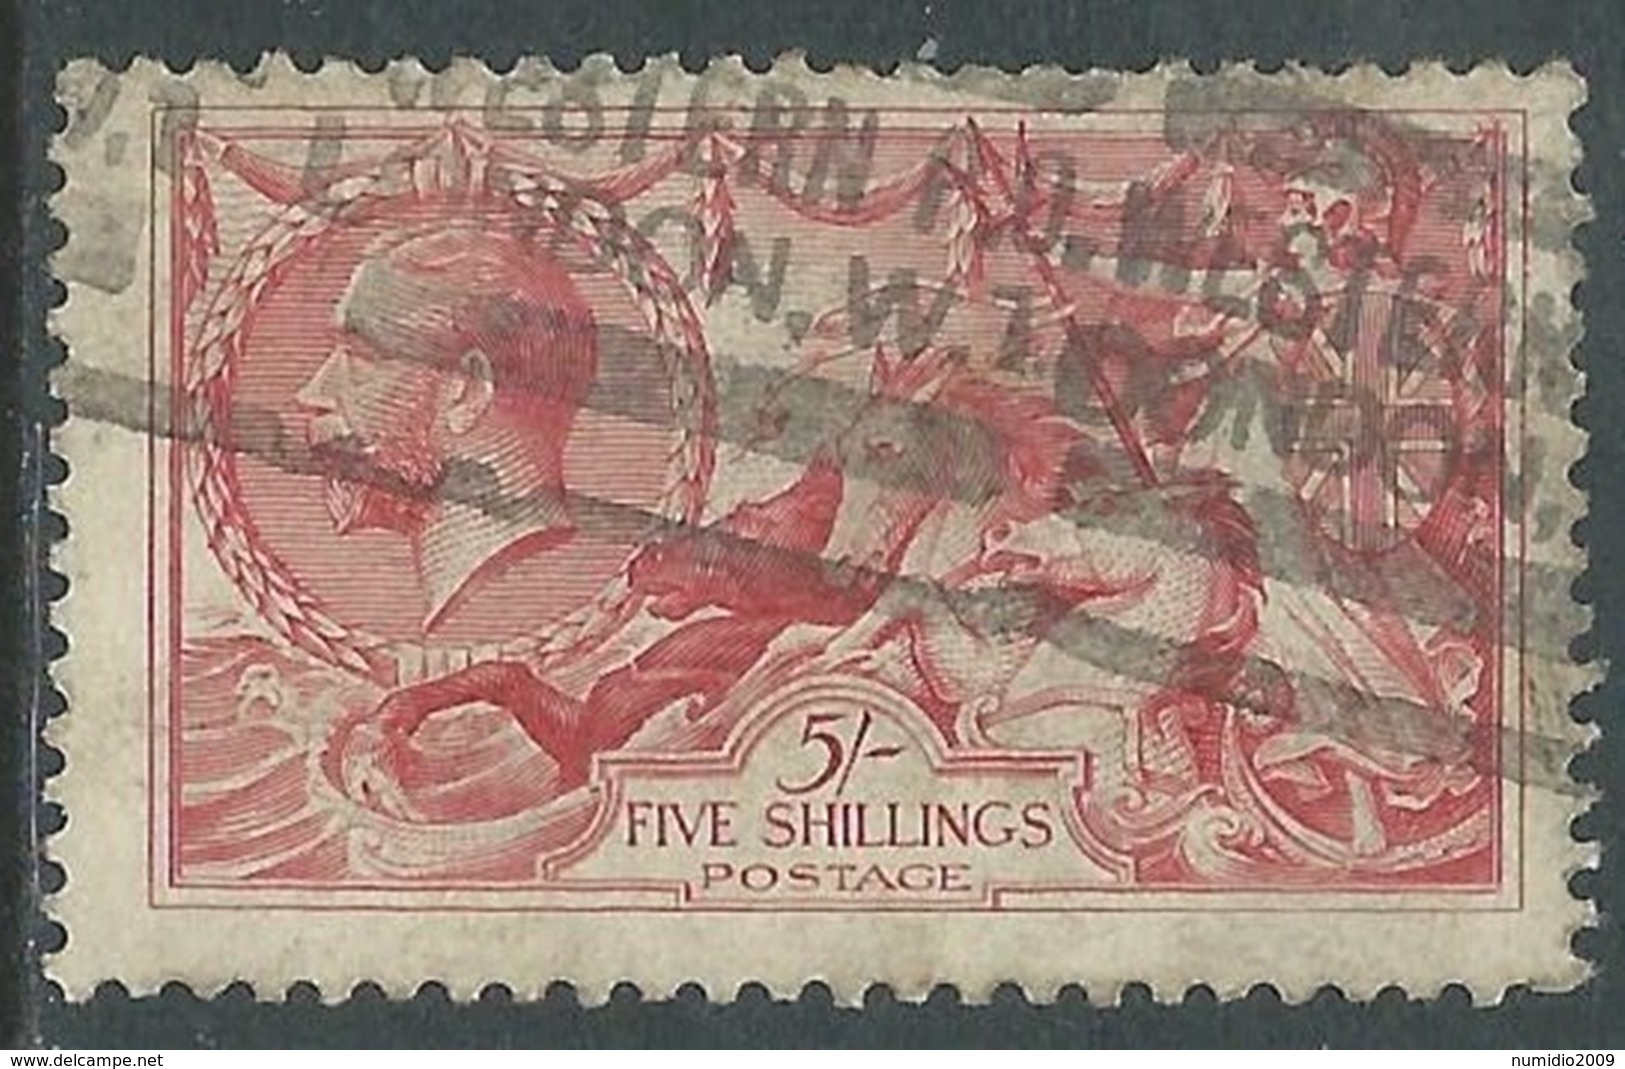 1918-19 GREAT BRITAIN USED SEA HORSES SG 416 5s ROSE RED - F22-7 - Usados